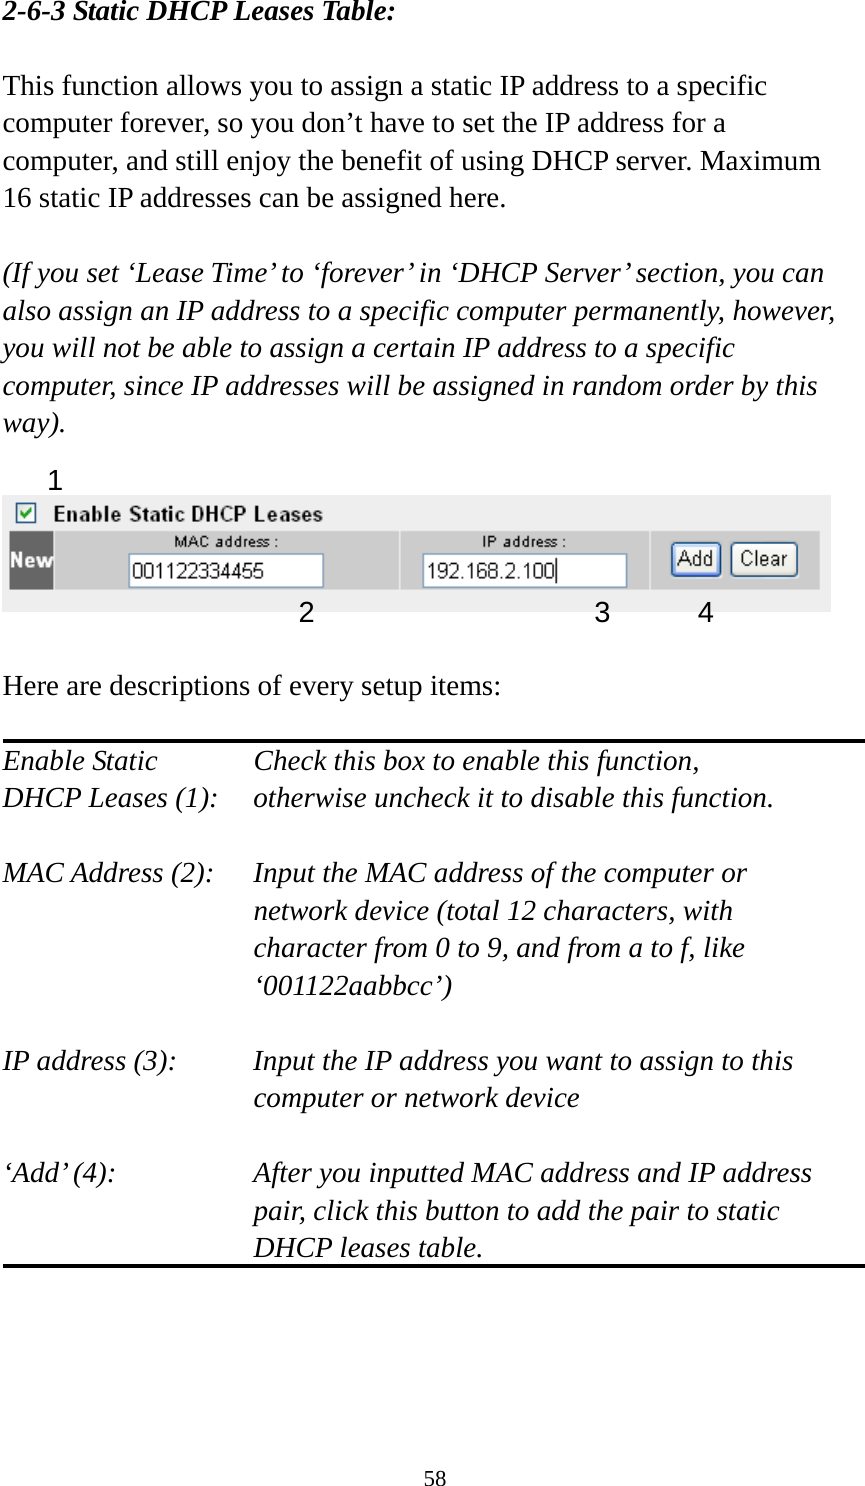 58 2-6-3 Static DHCP Leases Table:  This function allows you to assign a static IP address to a specific computer forever, so you don’t have to set the IP address for a computer, and still enjoy the benefit of using DHCP server. Maximum 16 static IP addresses can be assigned here.  (If you set ‘Lease Time’ to ‘forever’ in ‘DHCP Server’ section, you can also assign an IP address to a specific computer permanently, however, you will not be able to assign a certain IP address to a specific computer, since IP addresses will be assigned in random order by this way).     Here are descriptions of every setup items:  Enable Static      Check this box to enable this function, DHCP Leases (1):    otherwise uncheck it to disable this function.  MAC Address (2):    Input the MAC address of the computer or network device (total 12 characters, with character from 0 to 9, and from a to f, like ‘001122aabbcc’)   IP address (3):    Input the IP address you want to assign to this computer or network device    ‘Add’ (4):    After you inputted MAC address and IP address pair, click this button to add the pair to static DHCP leases table.     1 2 3 4 